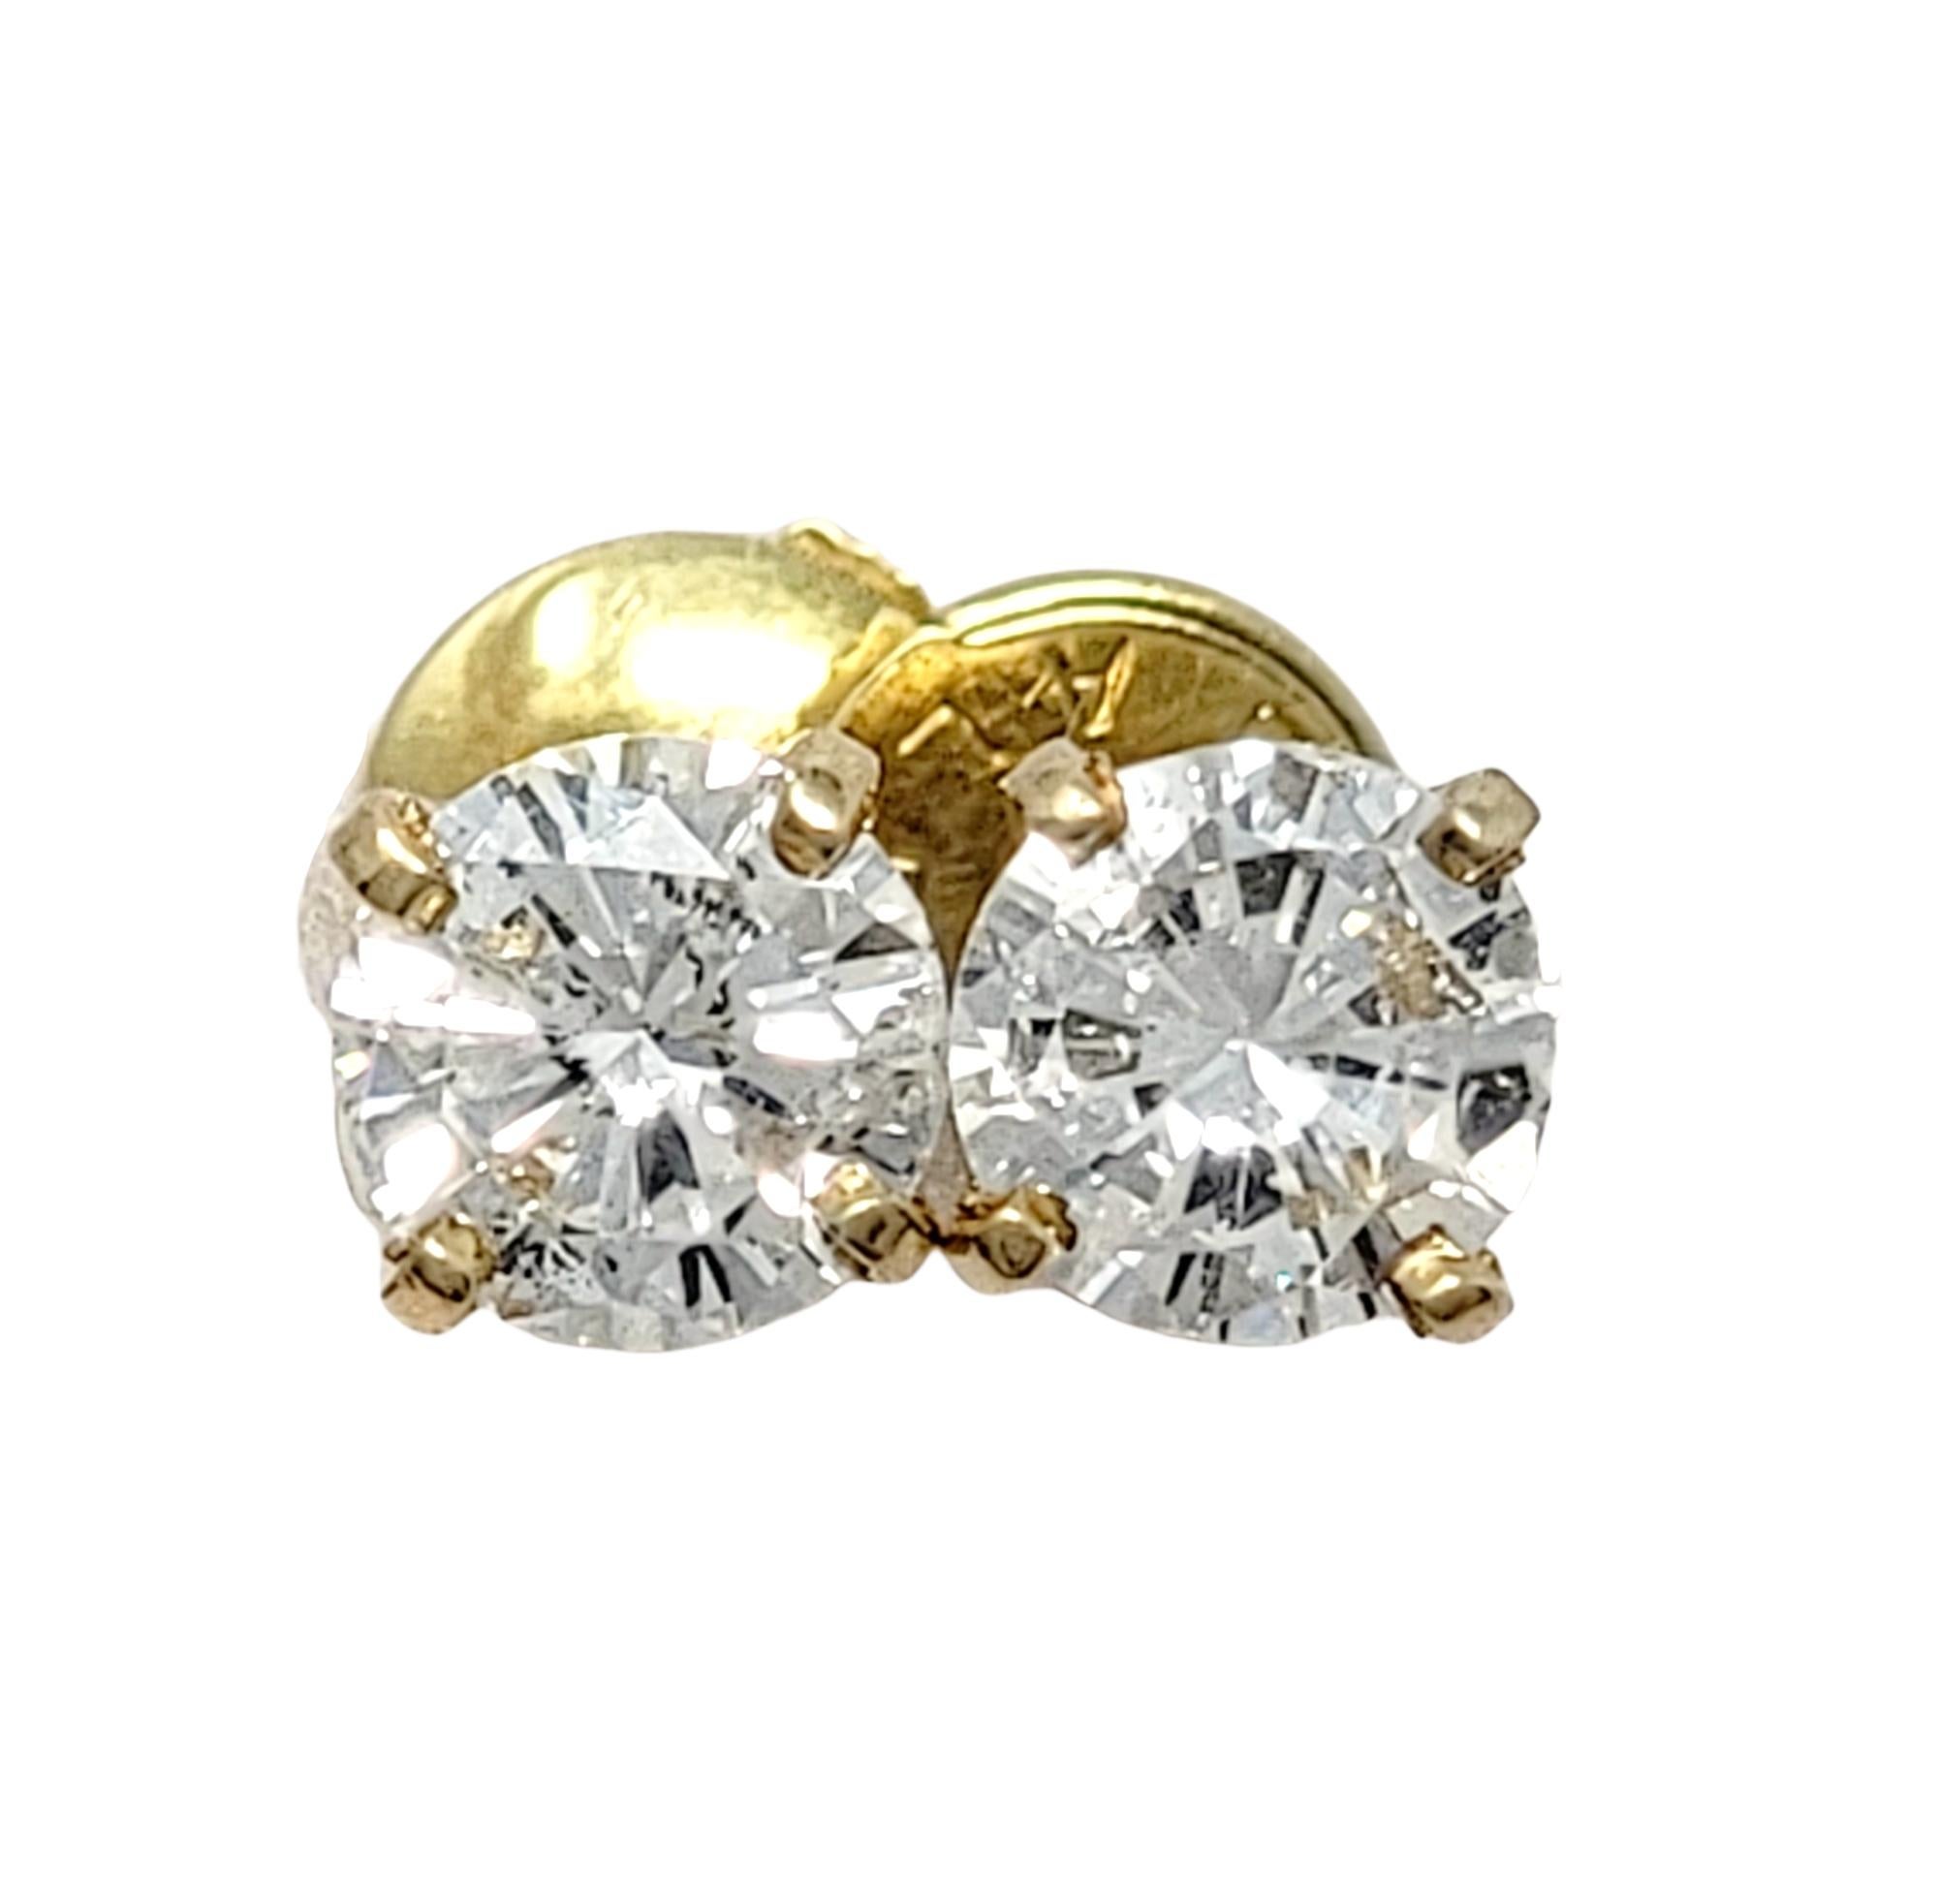 Women's or Men's 1.10 Carat Total Round Brilliant Solitaire Diamond Stud Earrings in Yellow Gold